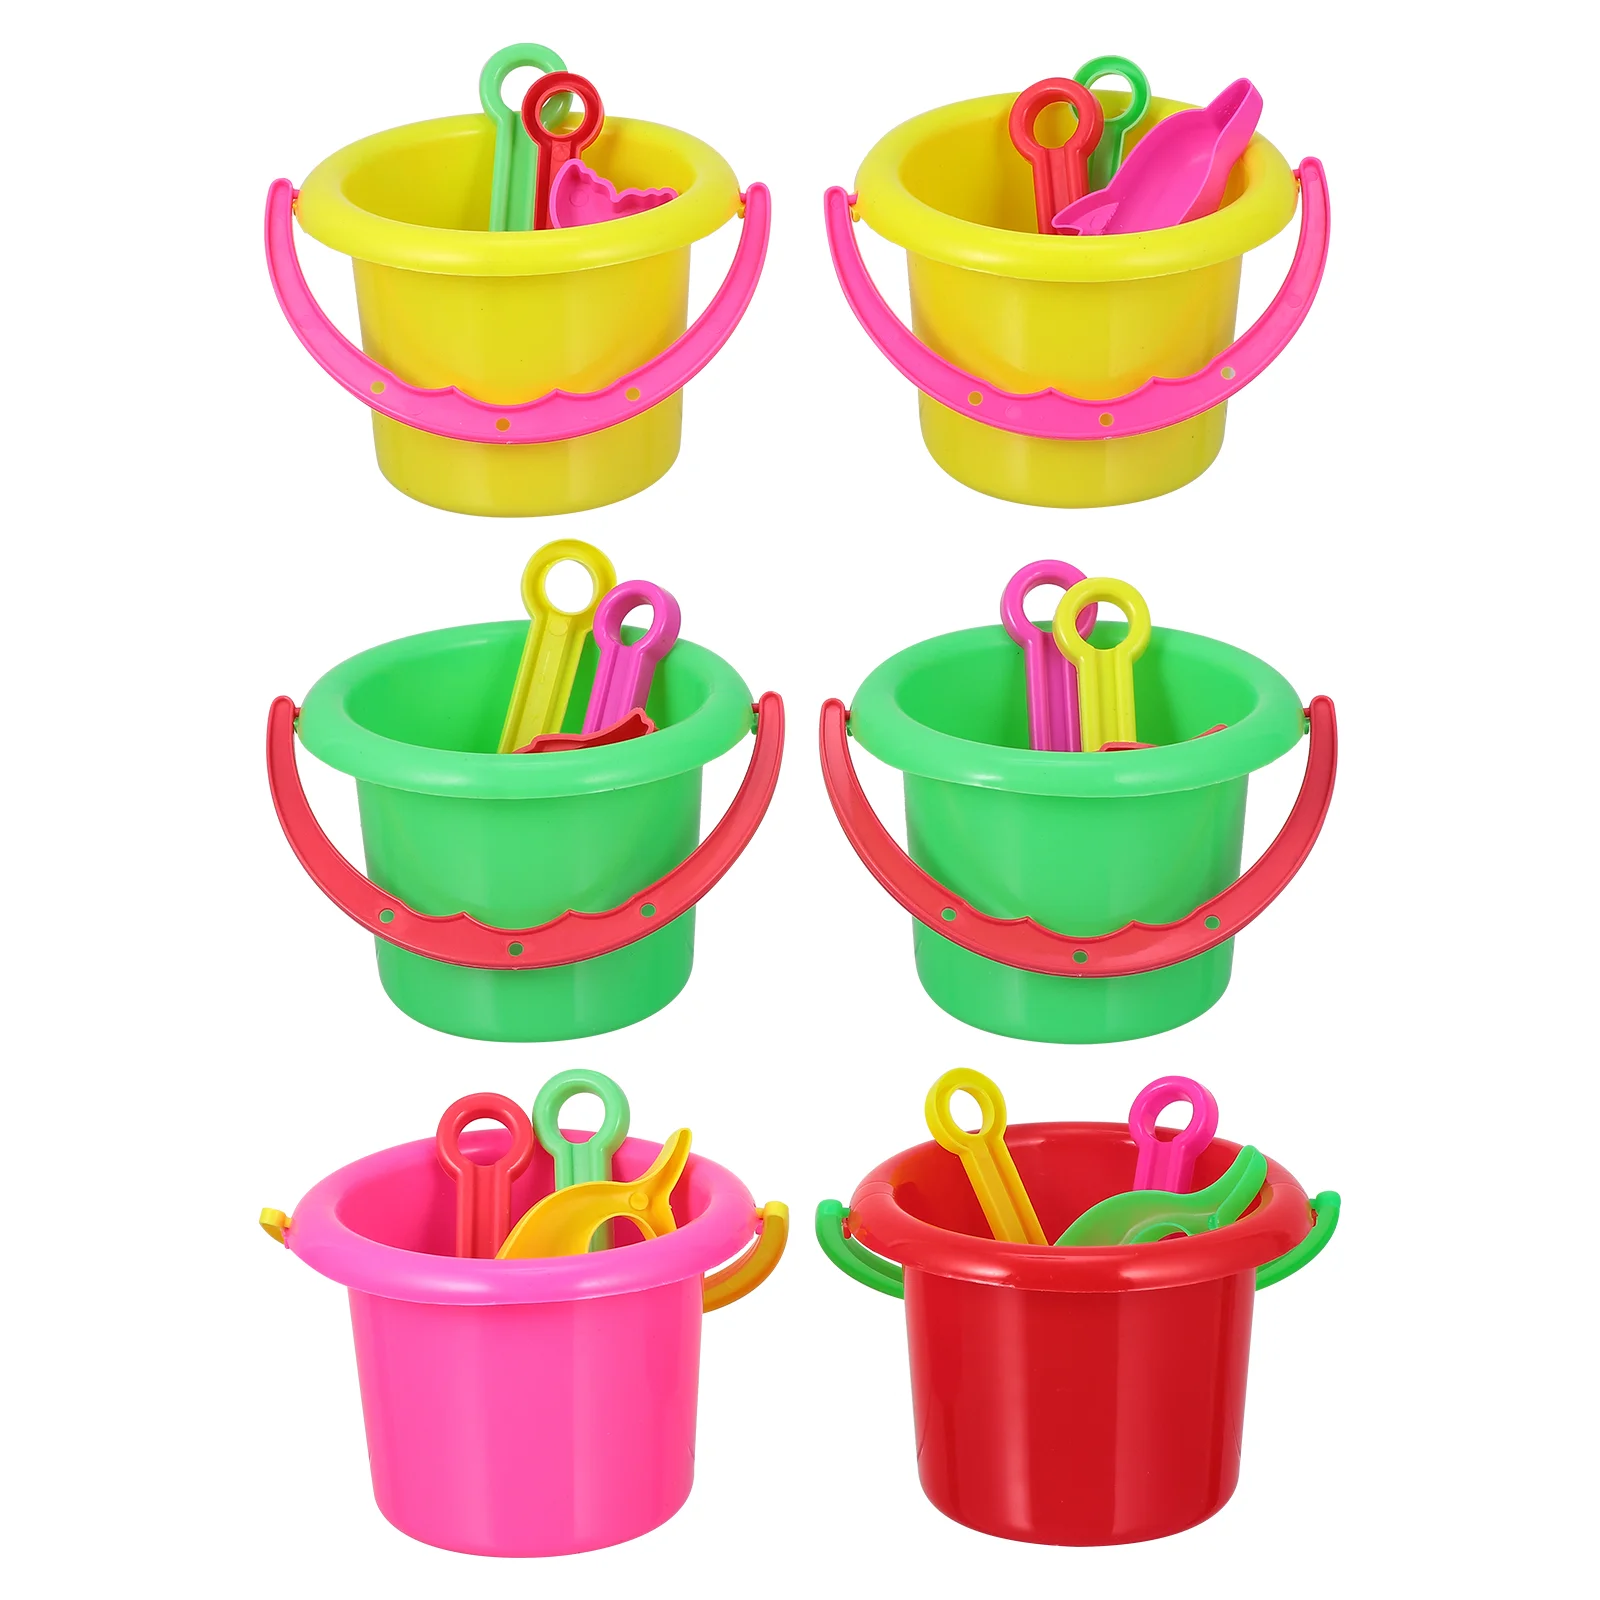 

24pcs Child Sand Bucket Set, Kids Beach Bucket, Including Beach Bucket,, Rake, Molds for Kids Toddlers Rollups the candy the